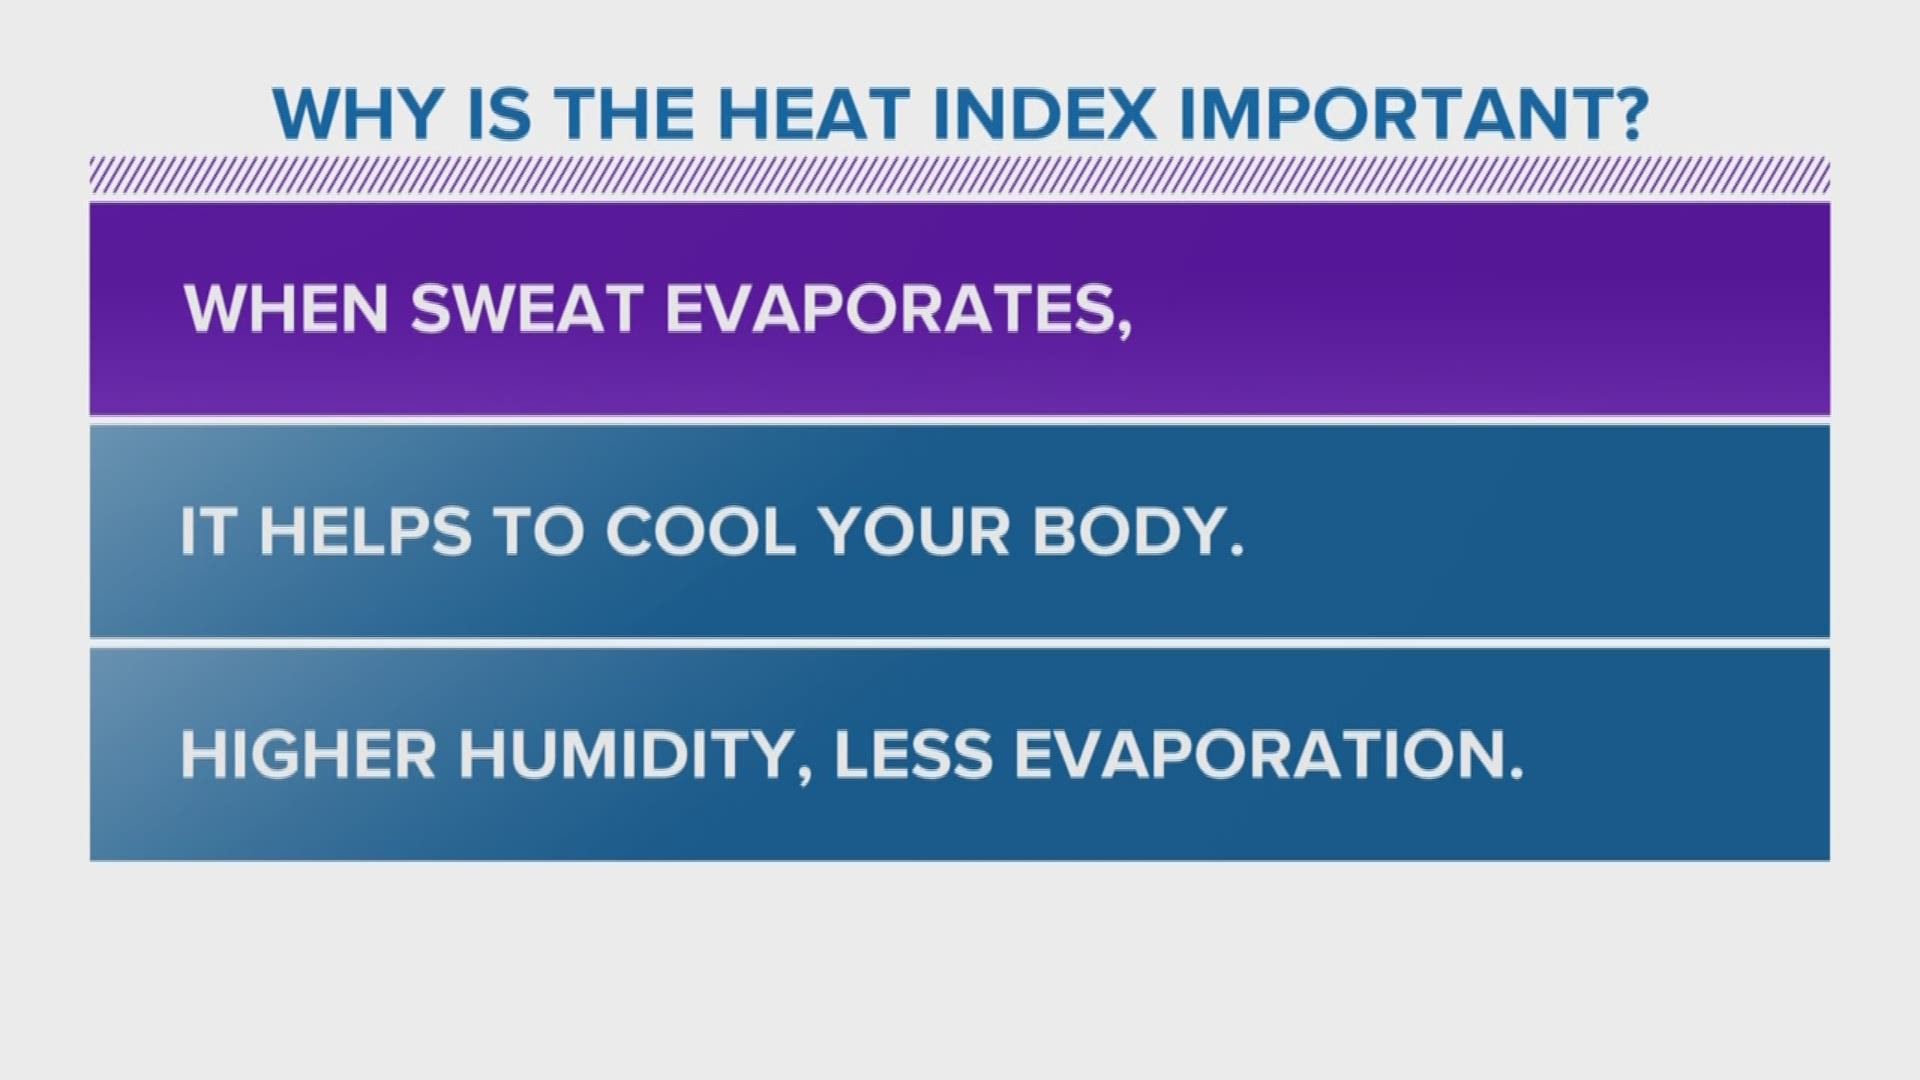 Meteorologist Bob French explains why the heat index is important and how humidity is related.